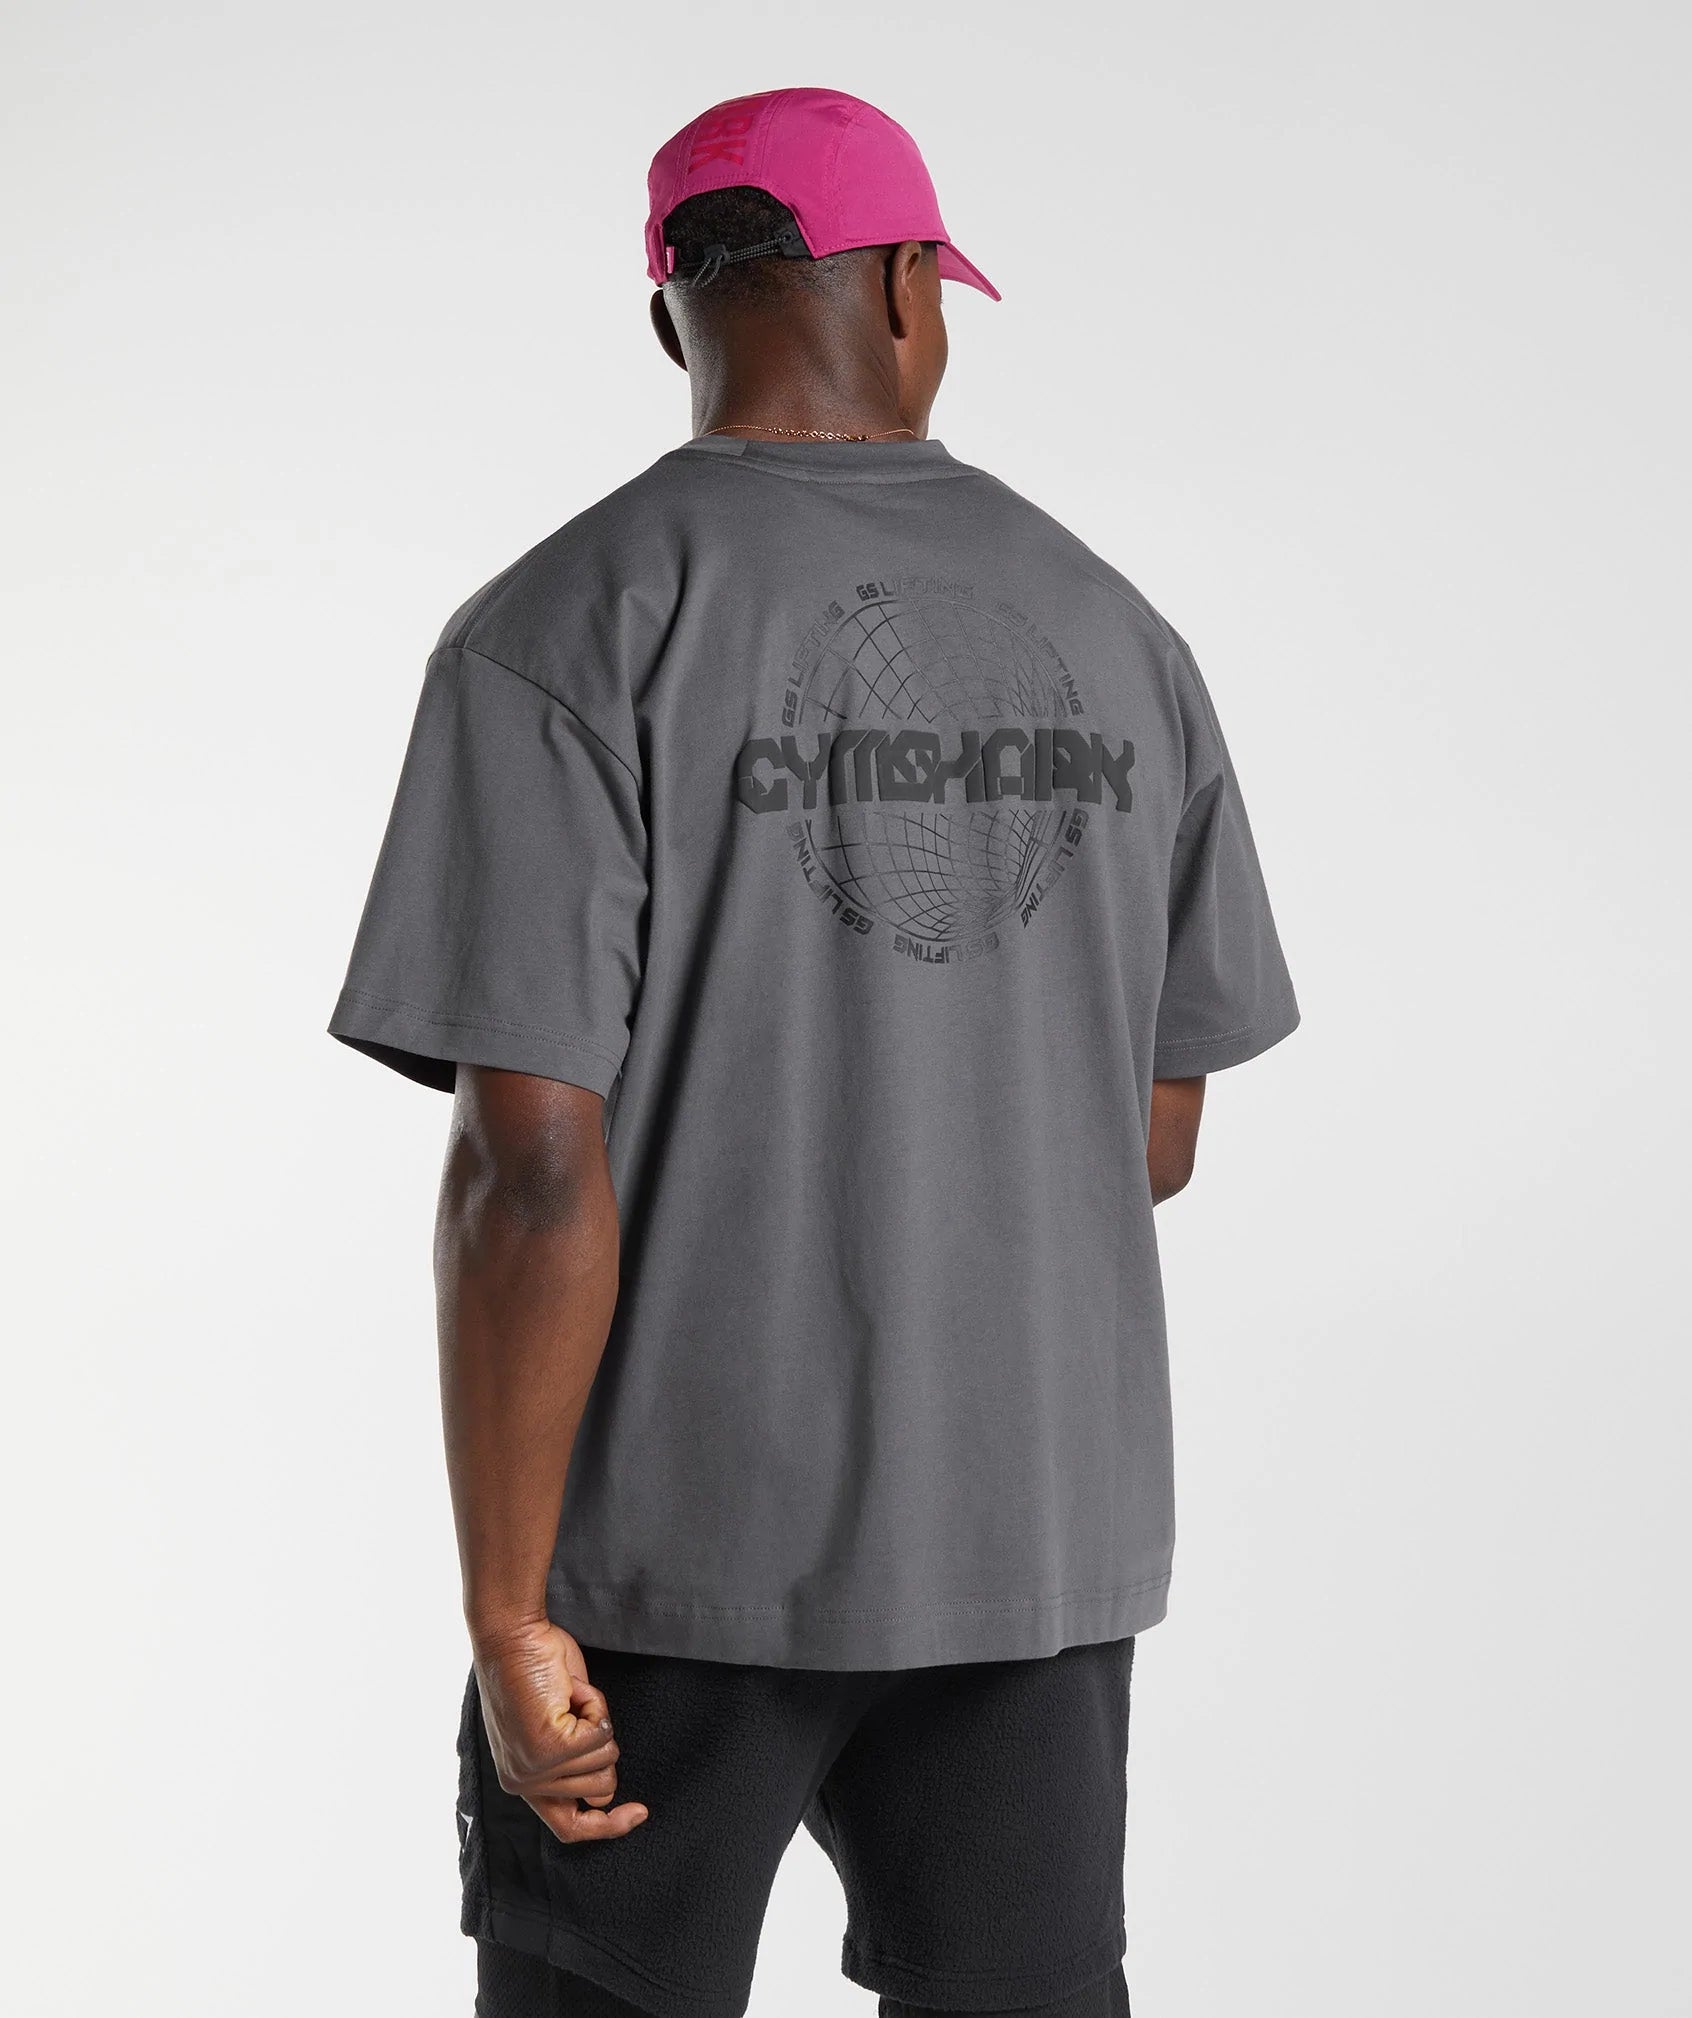 Vibes T-Shirt in Silhouette Grey - view 1